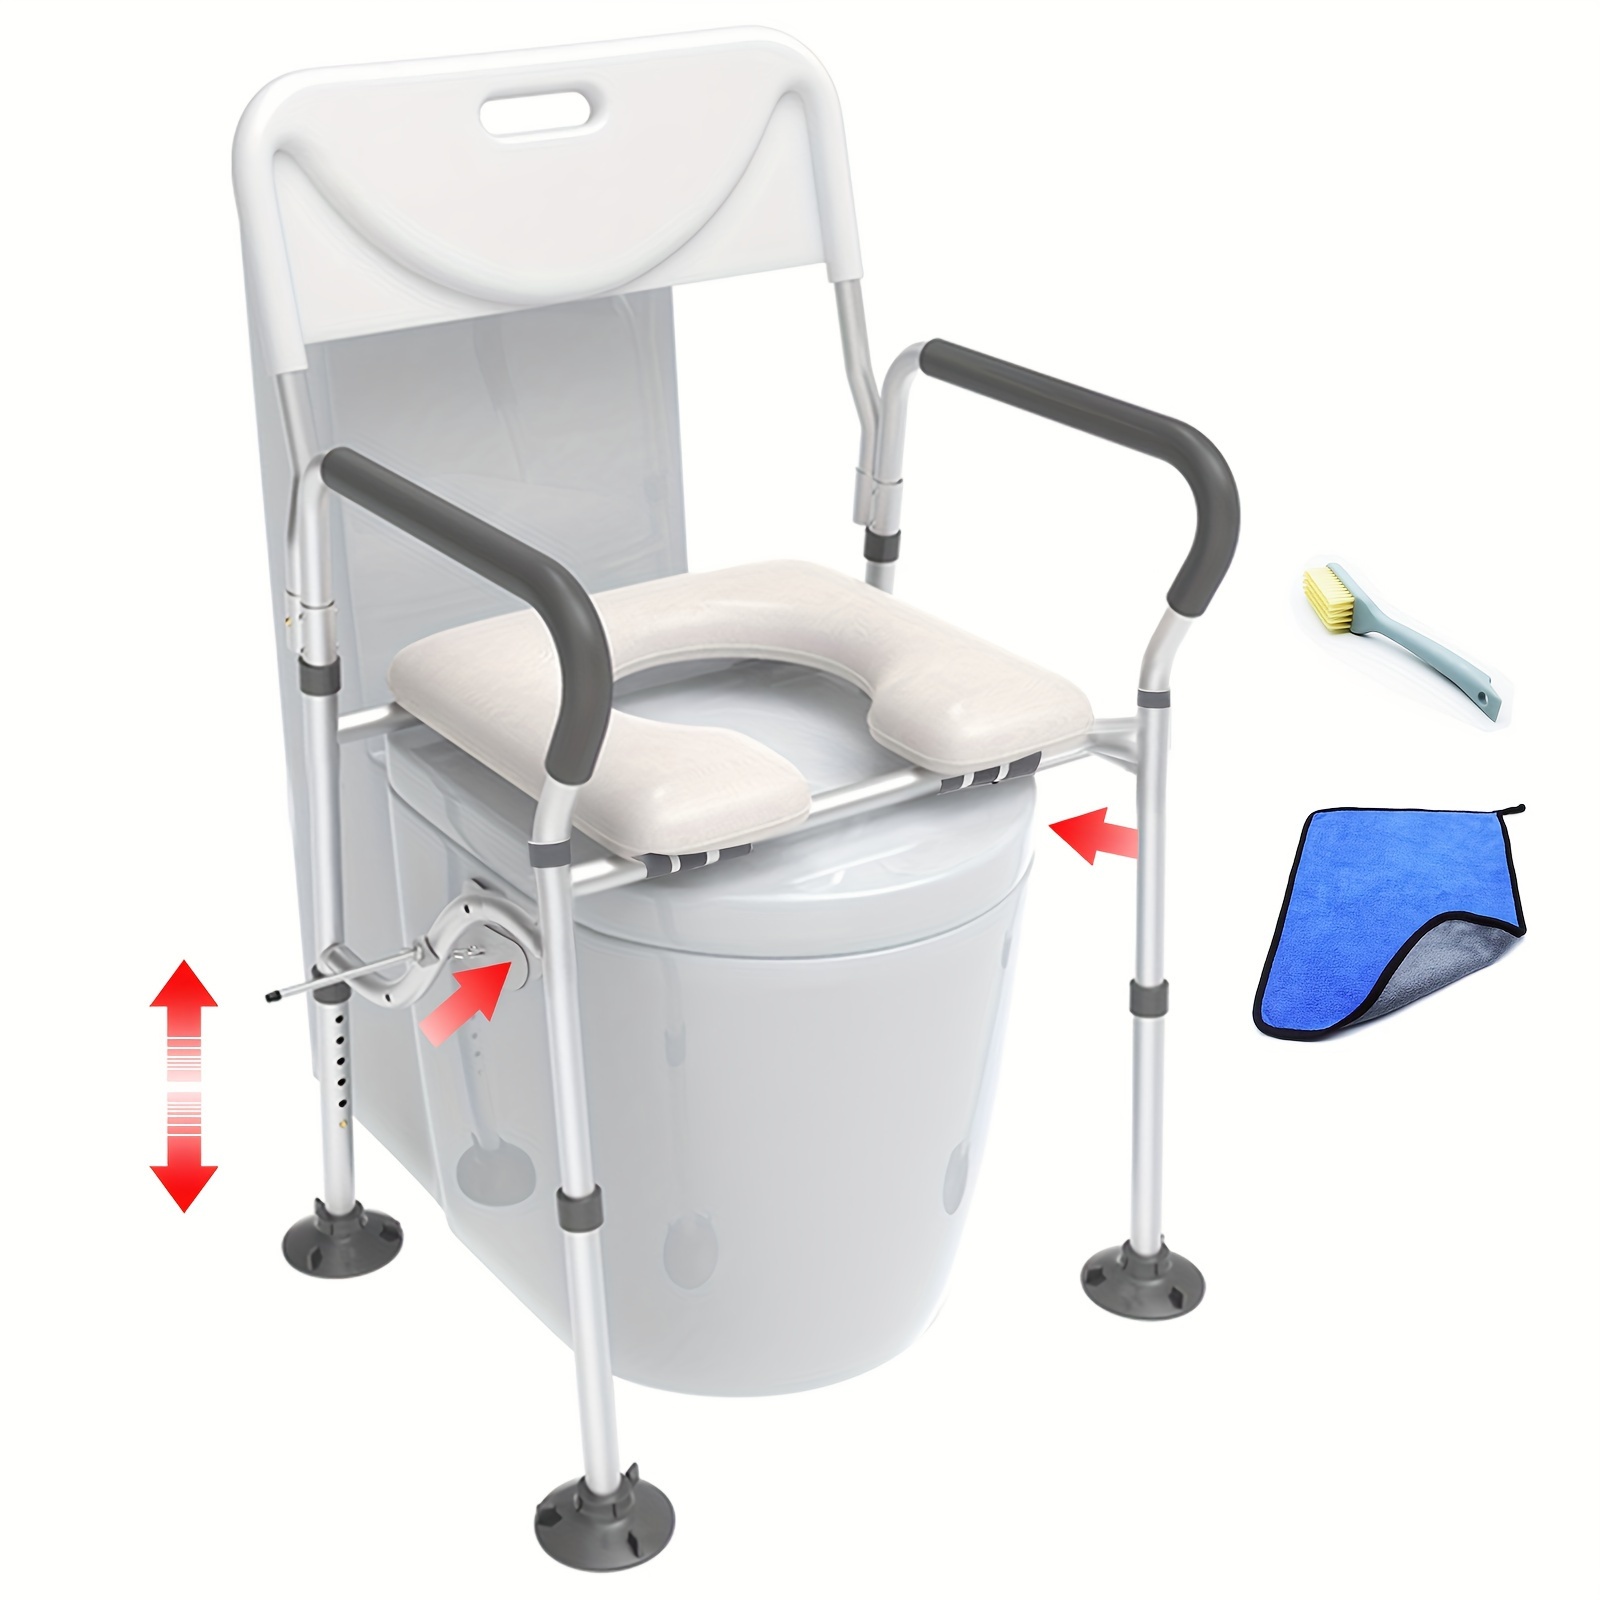 

Raised Toilet Seat With Handles Backrest 450lbs, Wide Padded Elevated Toilet Seat For Seniors Handicap, Elongated Stand Alone Toilet Safety Chair With Suction Foot Pad & Splints